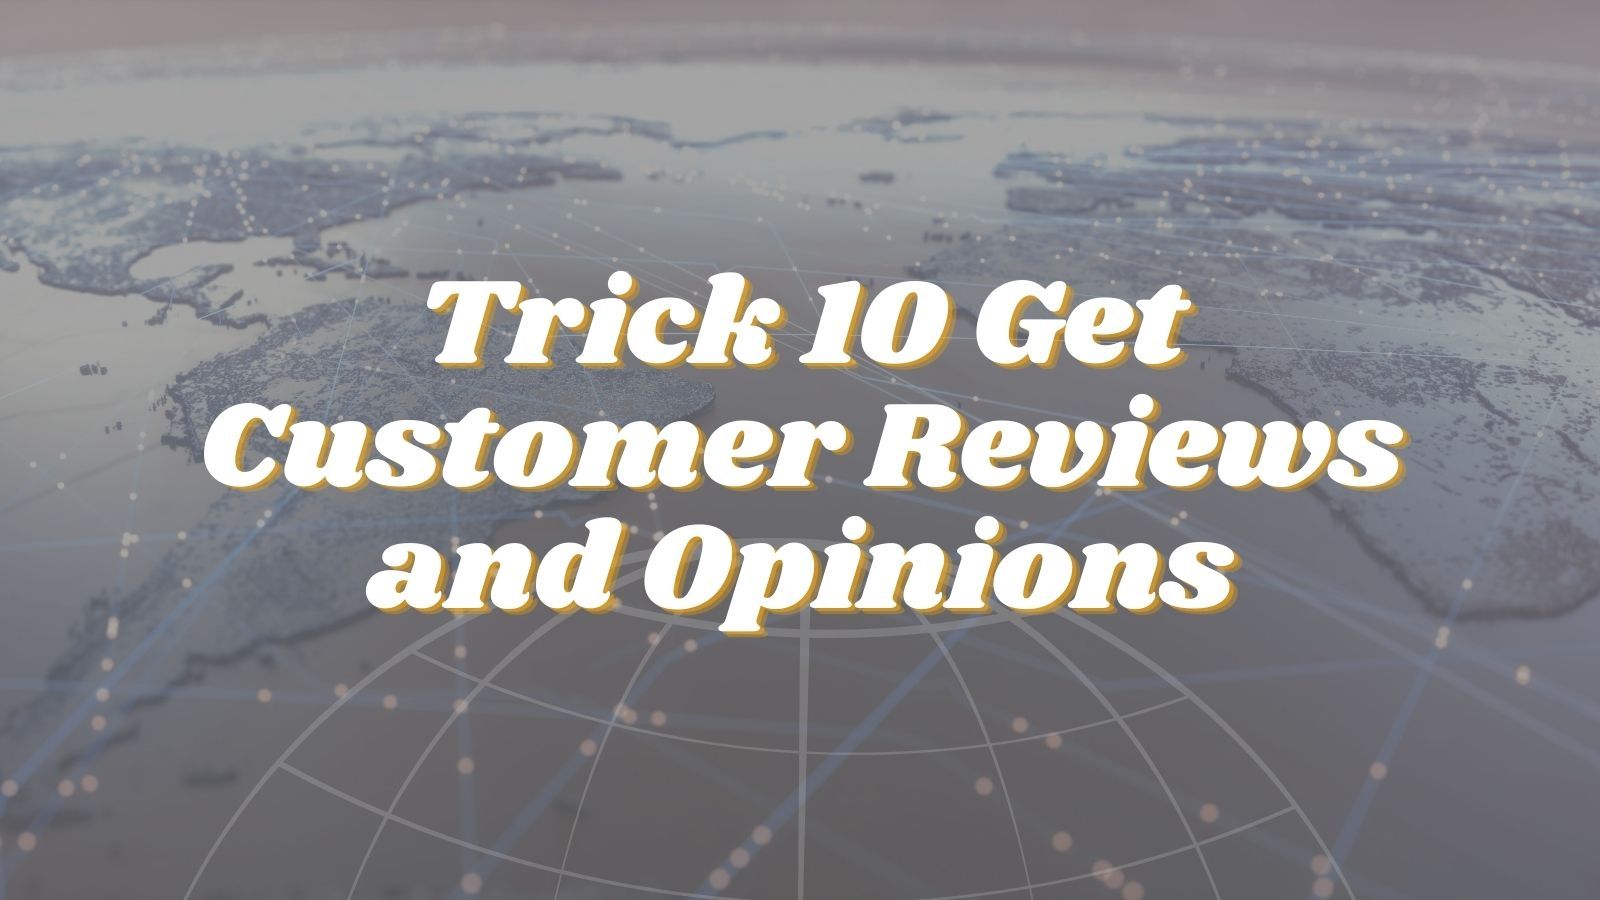 Get Customer Reviews and Opinions